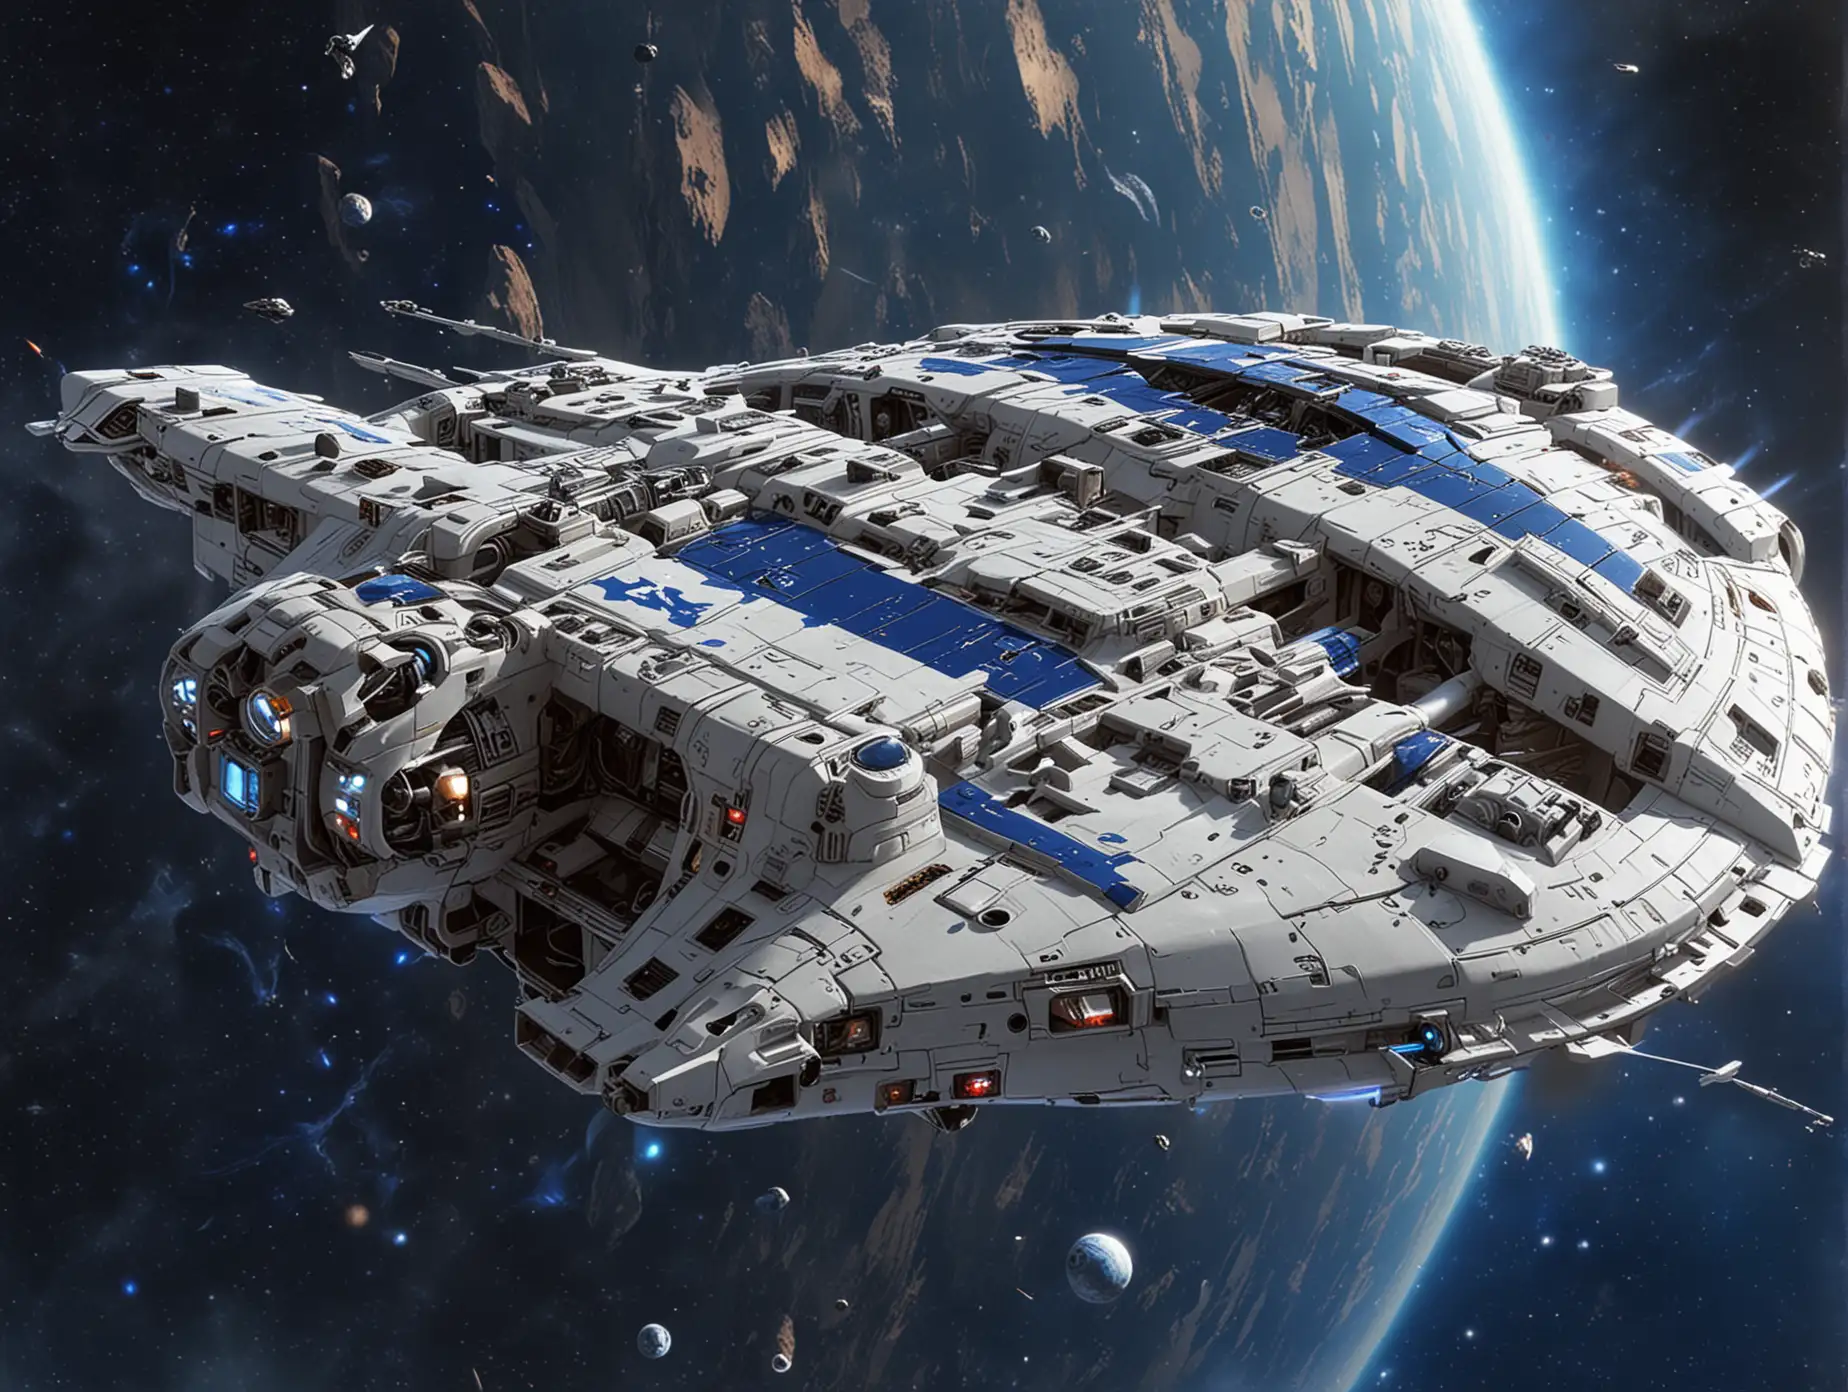 mothership from Homeworld II, white with blue markings